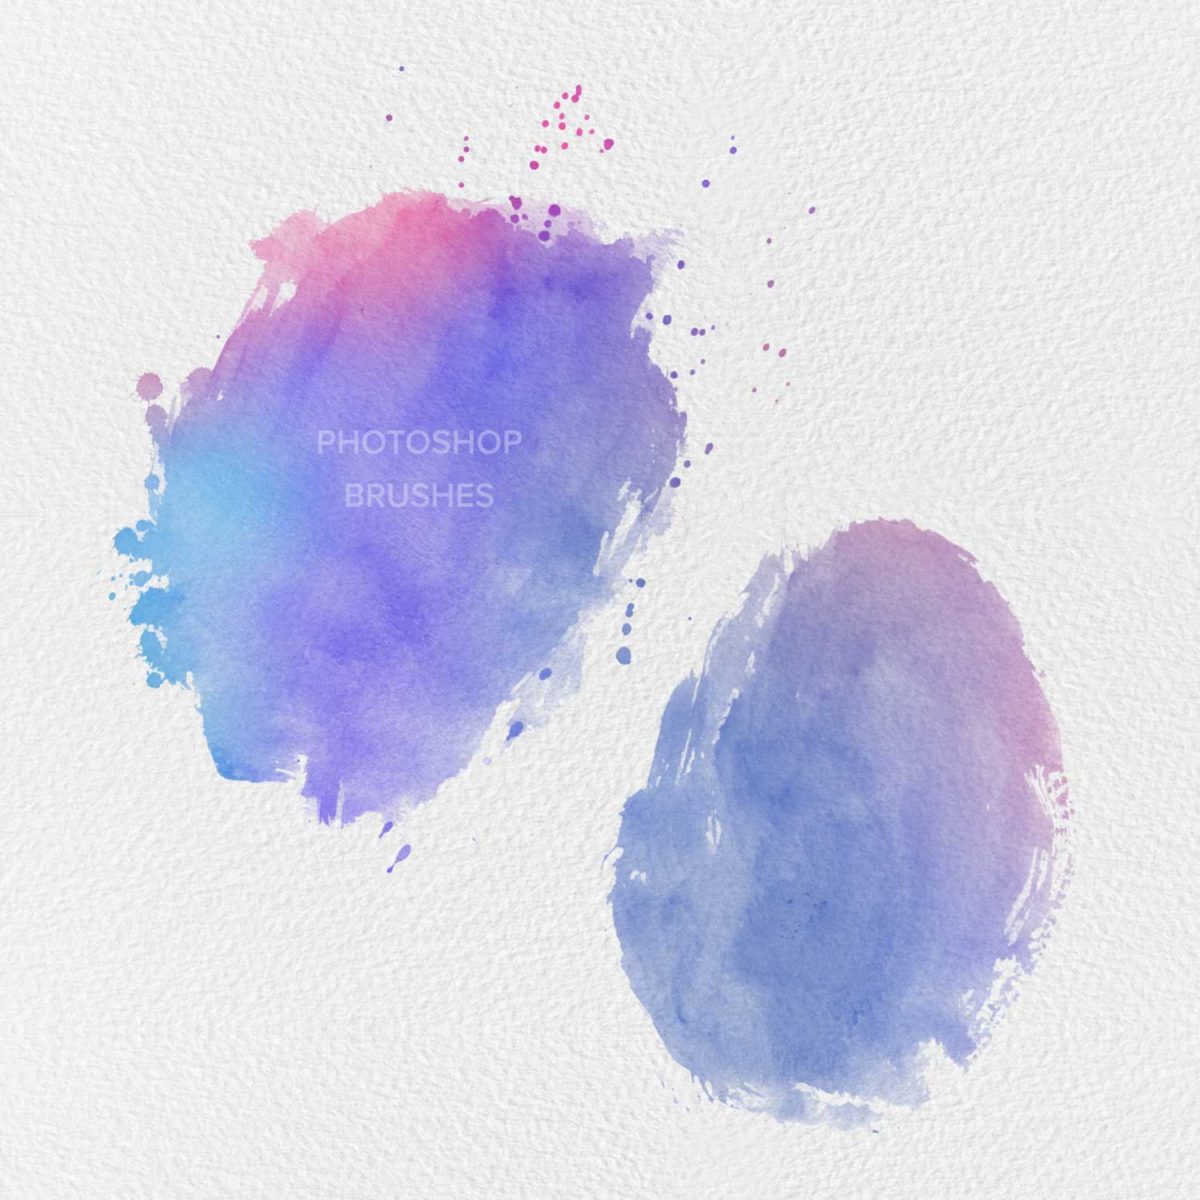 watercolor brush photoshop free download